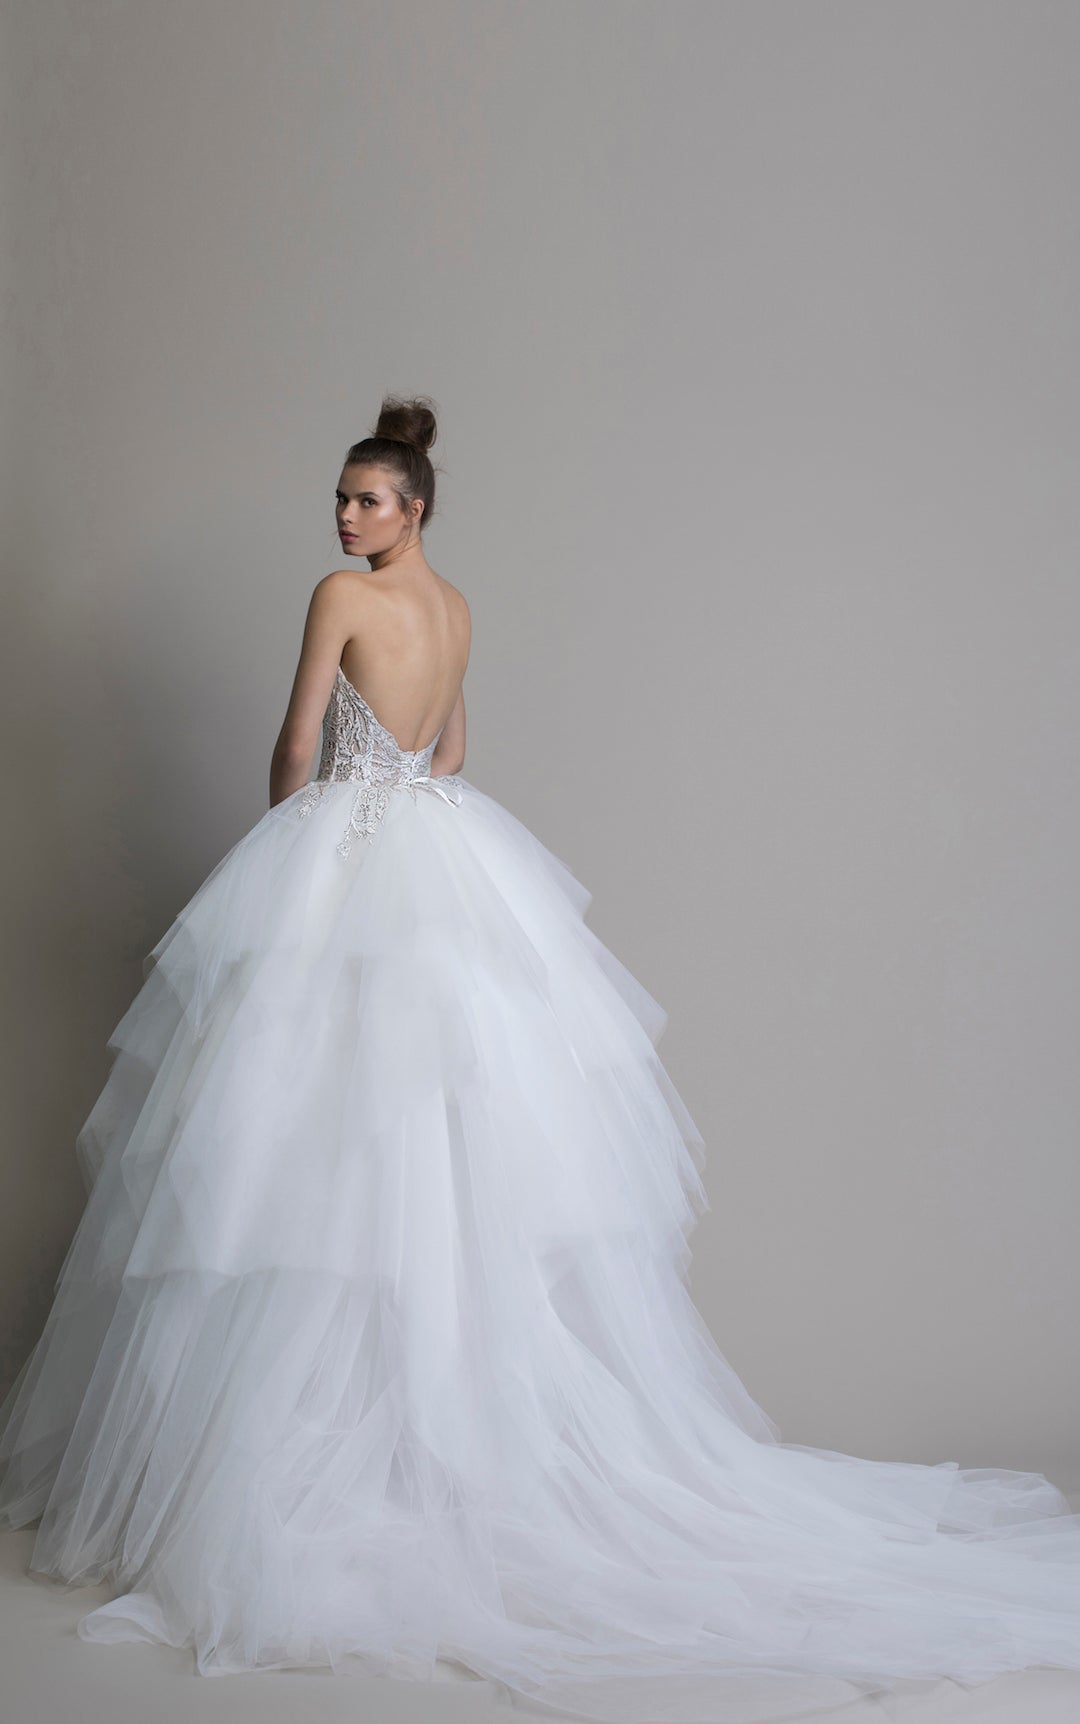 Pnina Tornai's new LOVE 2020 Collection is out! This is style 14757